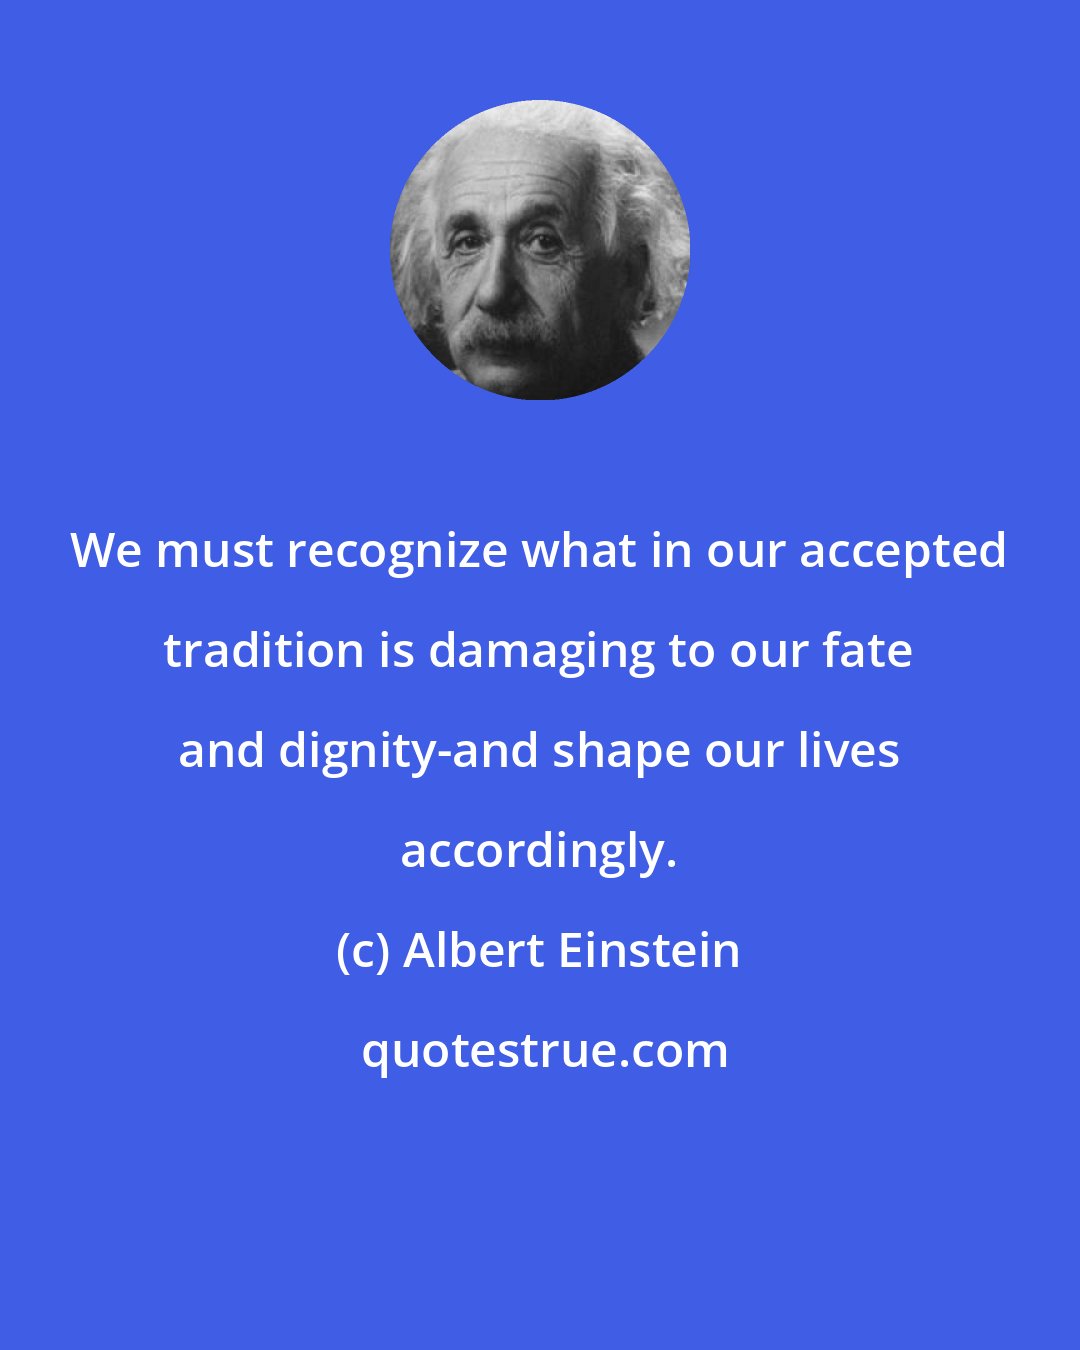 Albert Einstein: We must recognize what in our accepted tradition is damaging to our fate and dignity-and shape our lives accordingly.